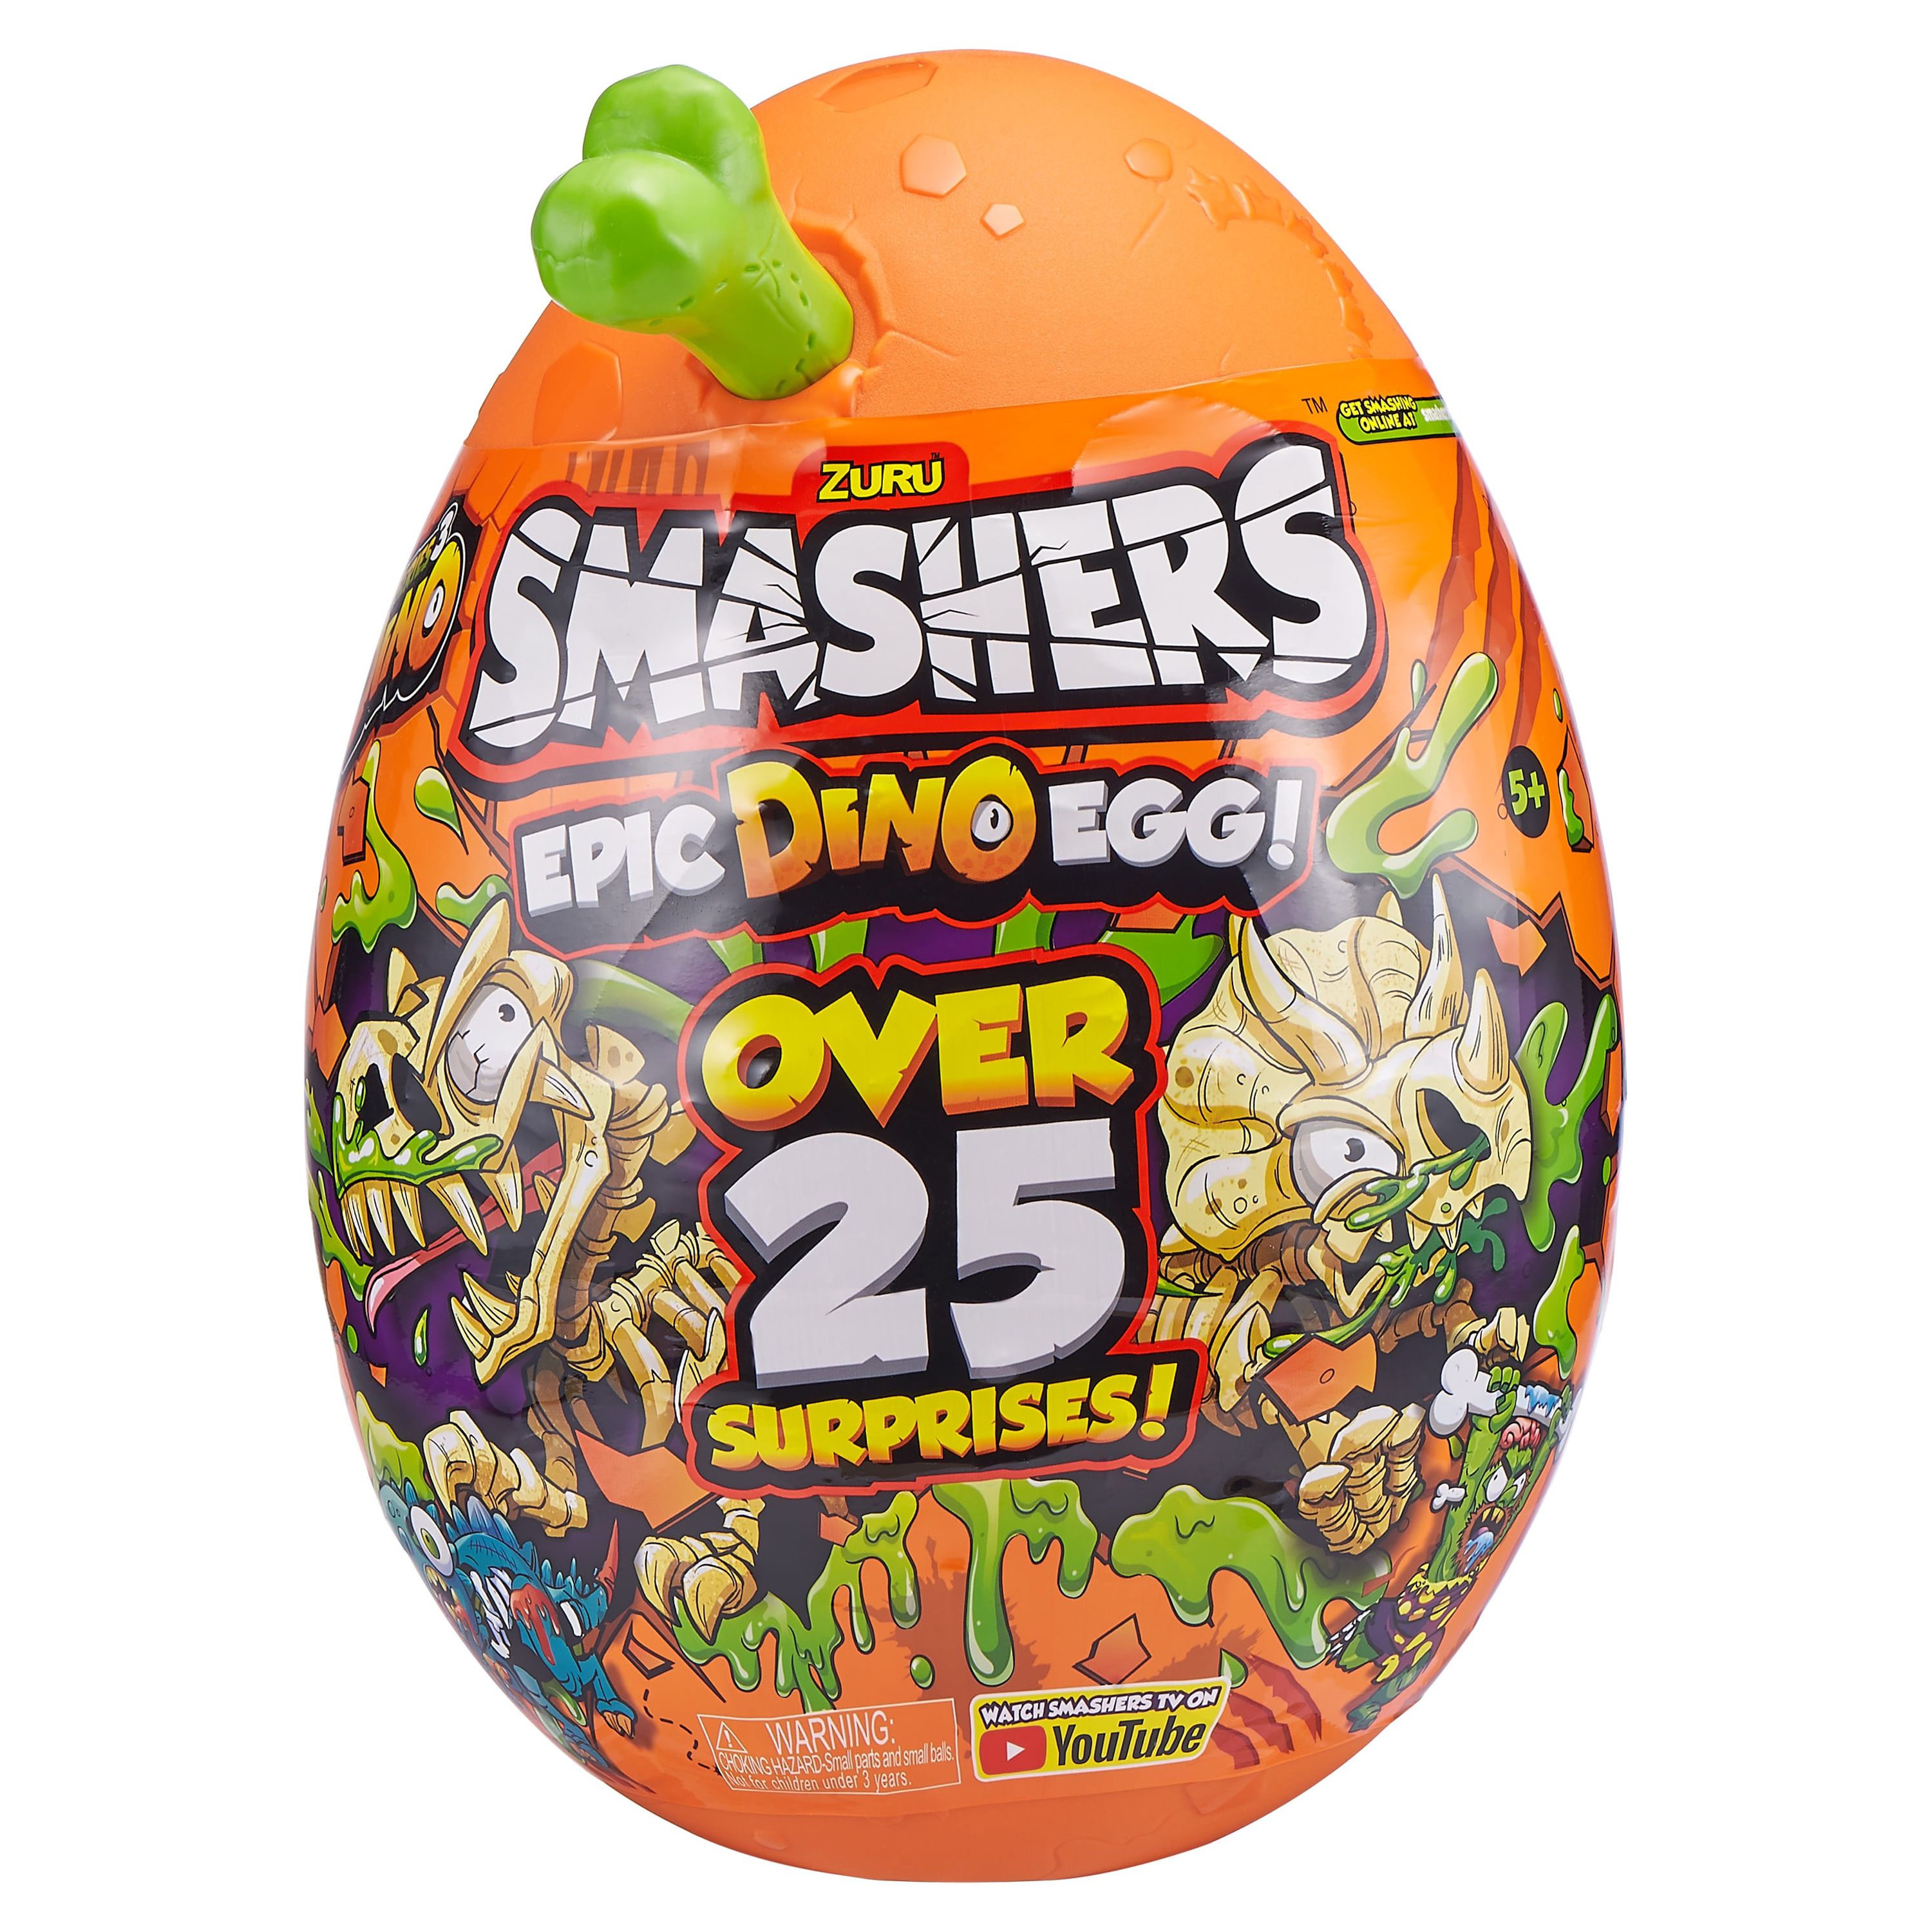 Smashers Epic Dino Egg Collectibles Series 3 Dino by ZURU - image 1 of 11